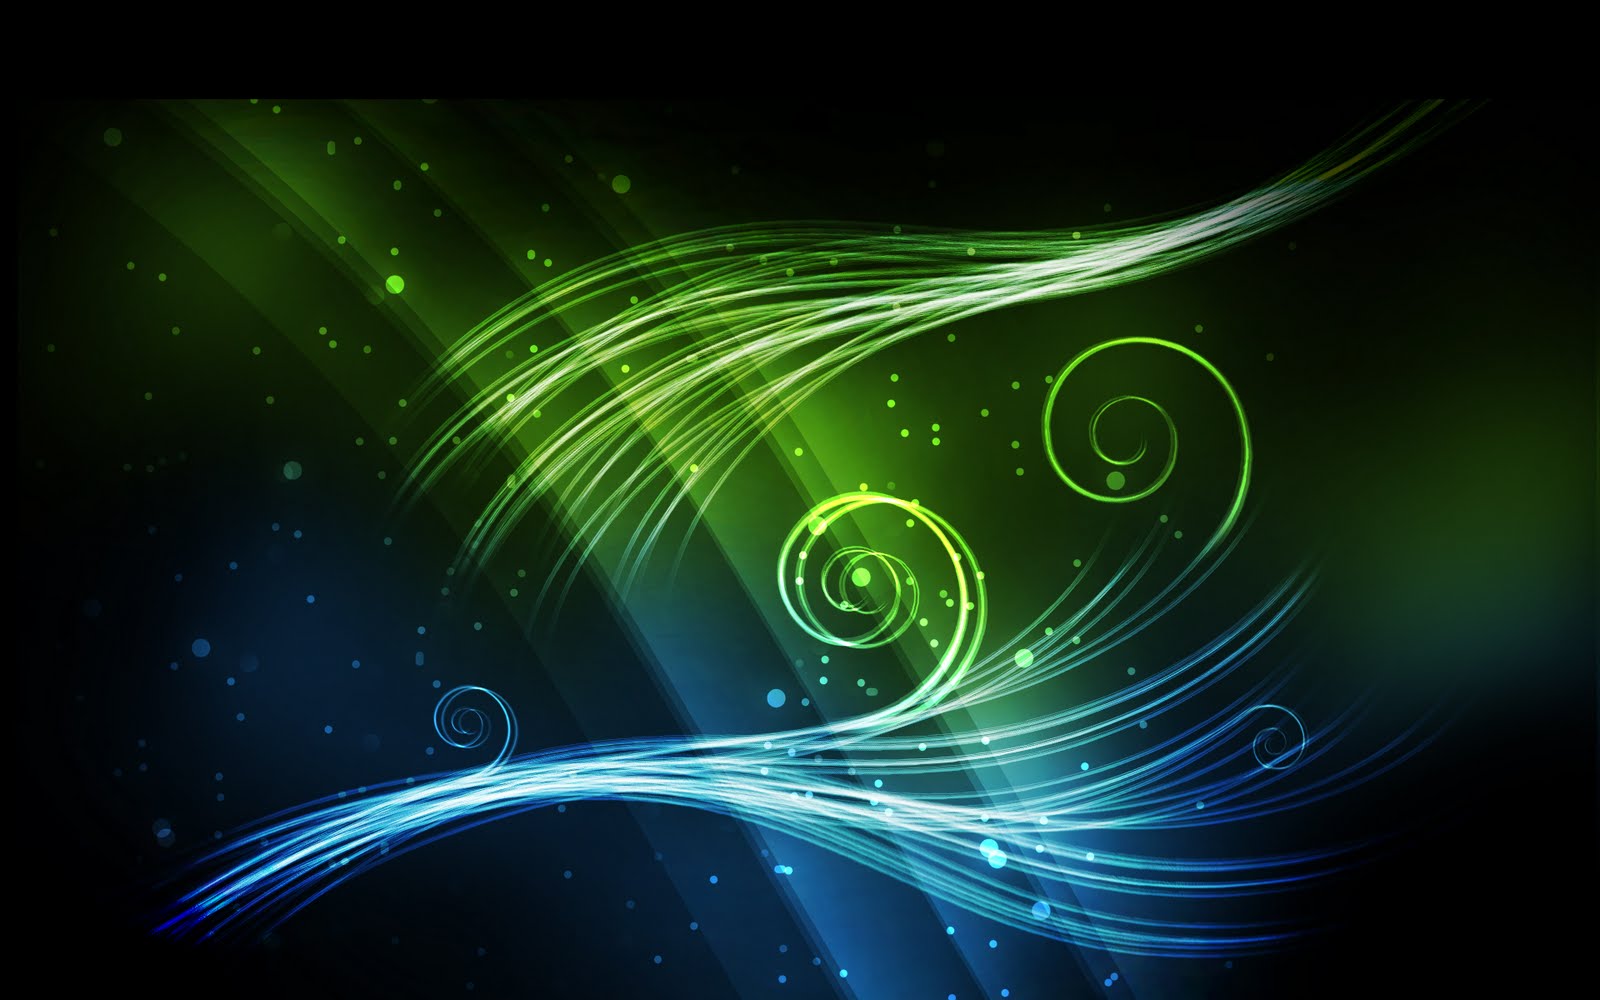 Abstract Shapes Blue and Green HD Wallpaper ~ The Wallpaper Database